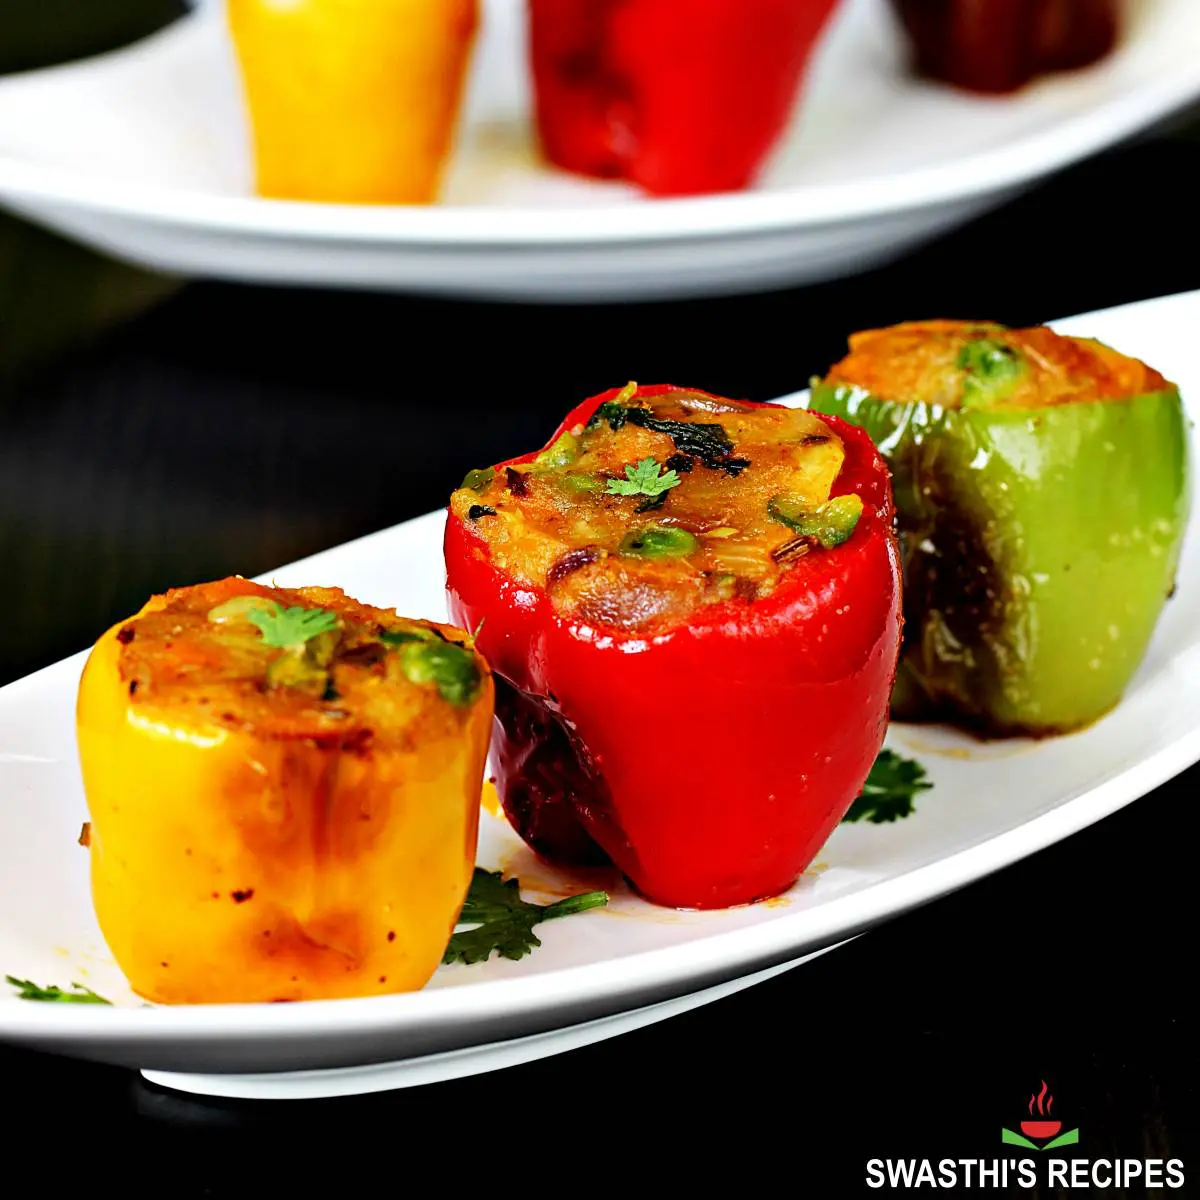 Stuffed Capsicum are Indian style vegetarian stuffed bell peppers